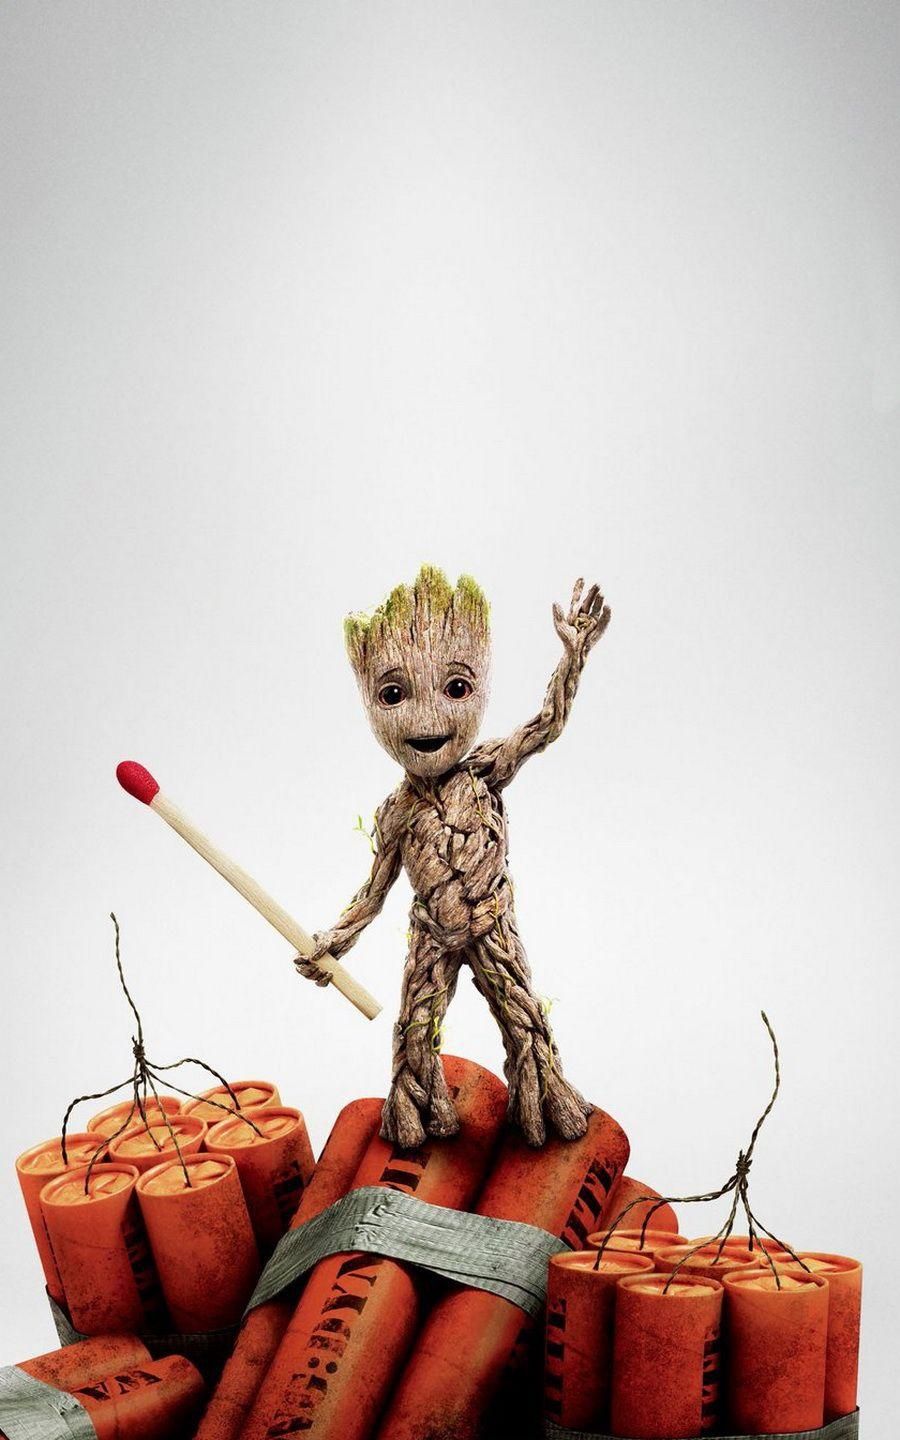 Baby Groot Guardians of the Galaxy Wallpaper